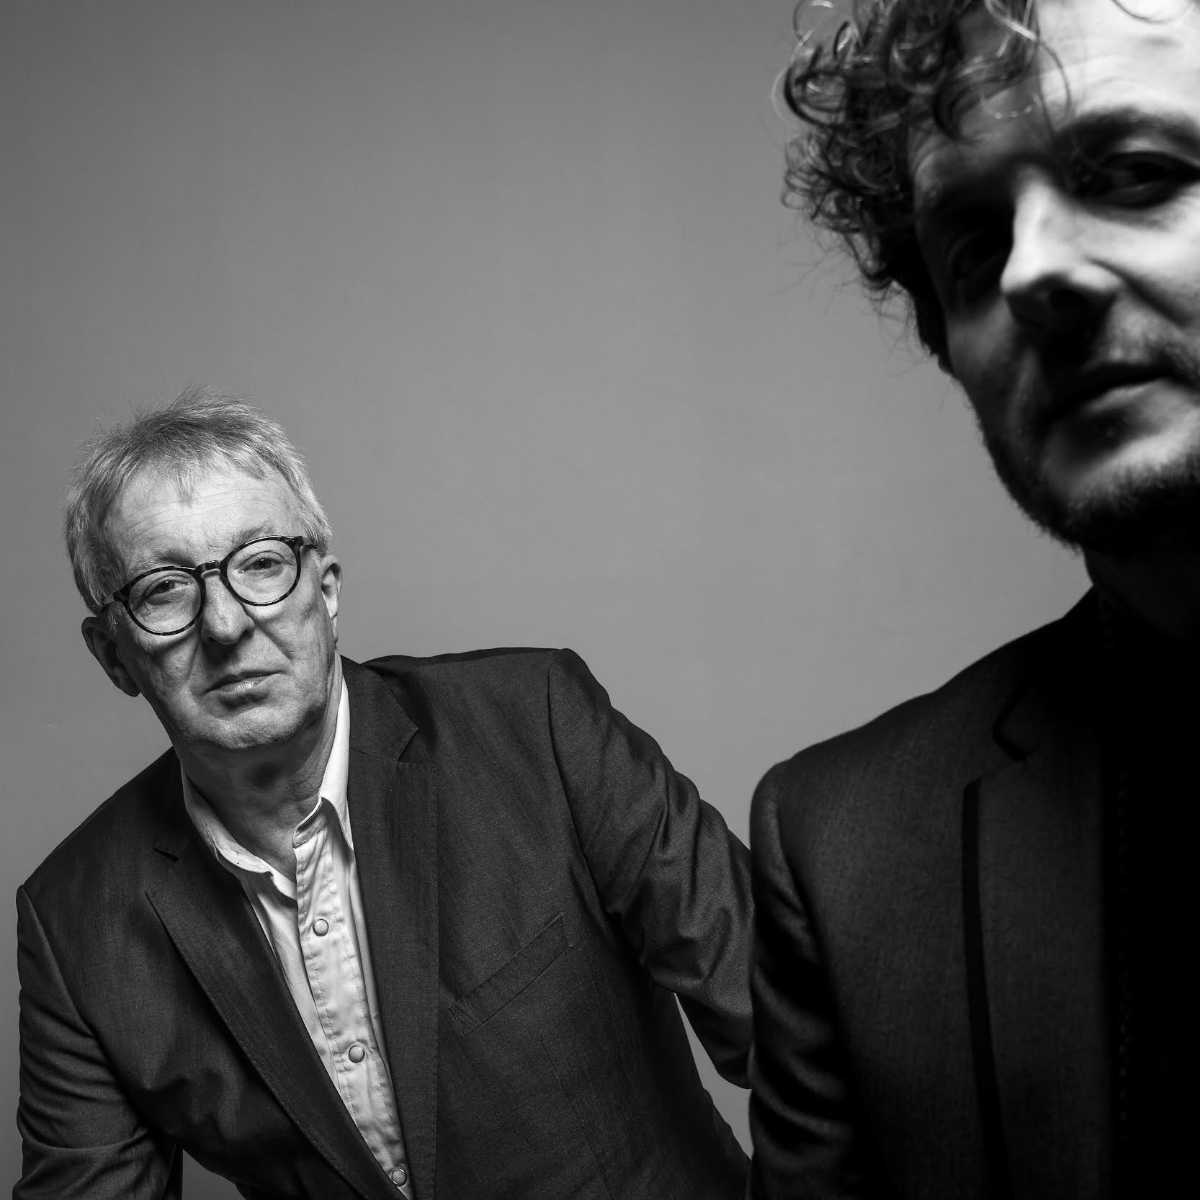 The Long Slow Ultra Splendid Life of The Sinclairs Alan Rider rates the new LP from Rat Scabies and Billy Shinbone - The Sinclairs